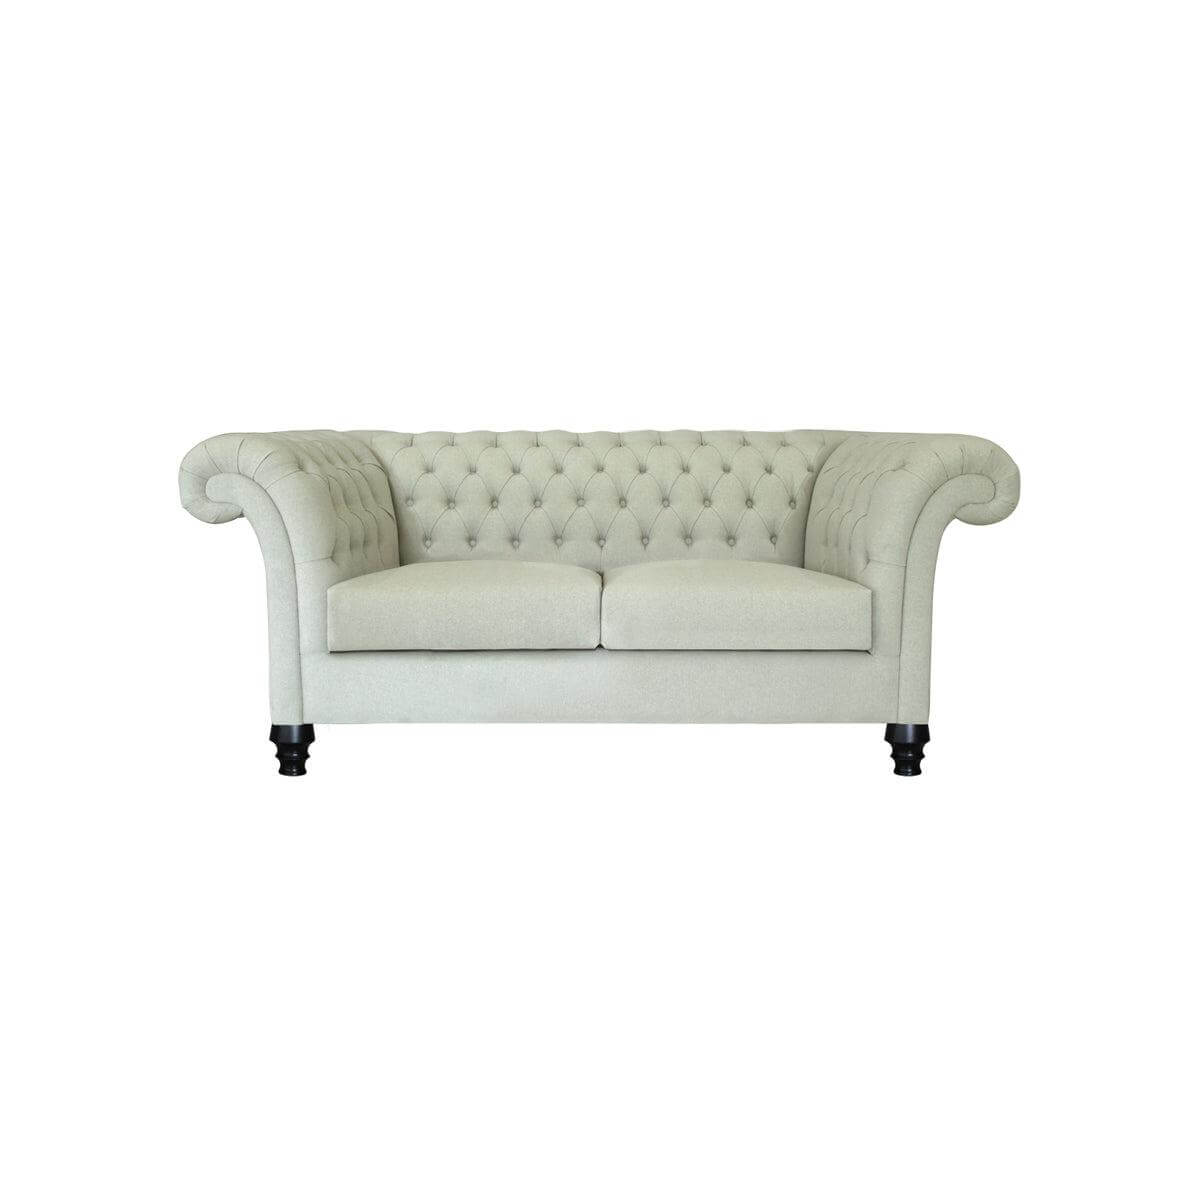 Savoy two seat sofa, unique and bold flair sofa